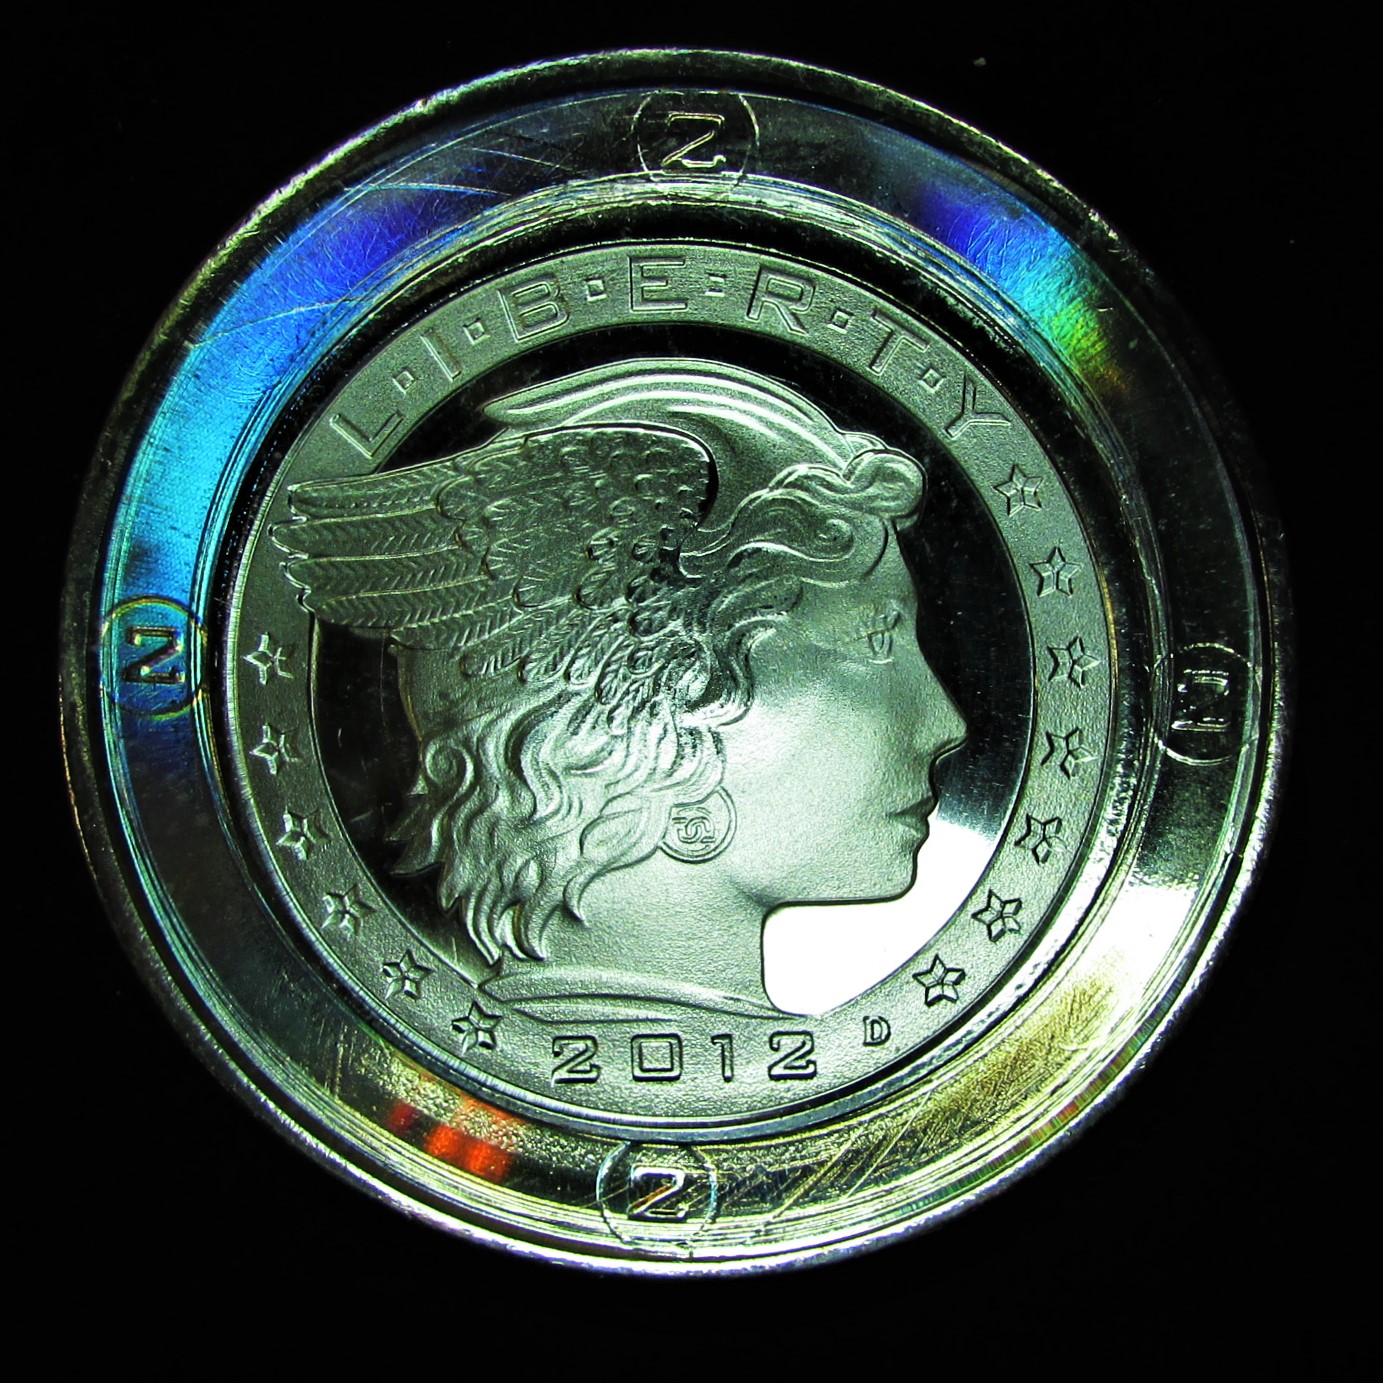 2012 USA Exchange Currency Concept - Holographic - obverse.JPG